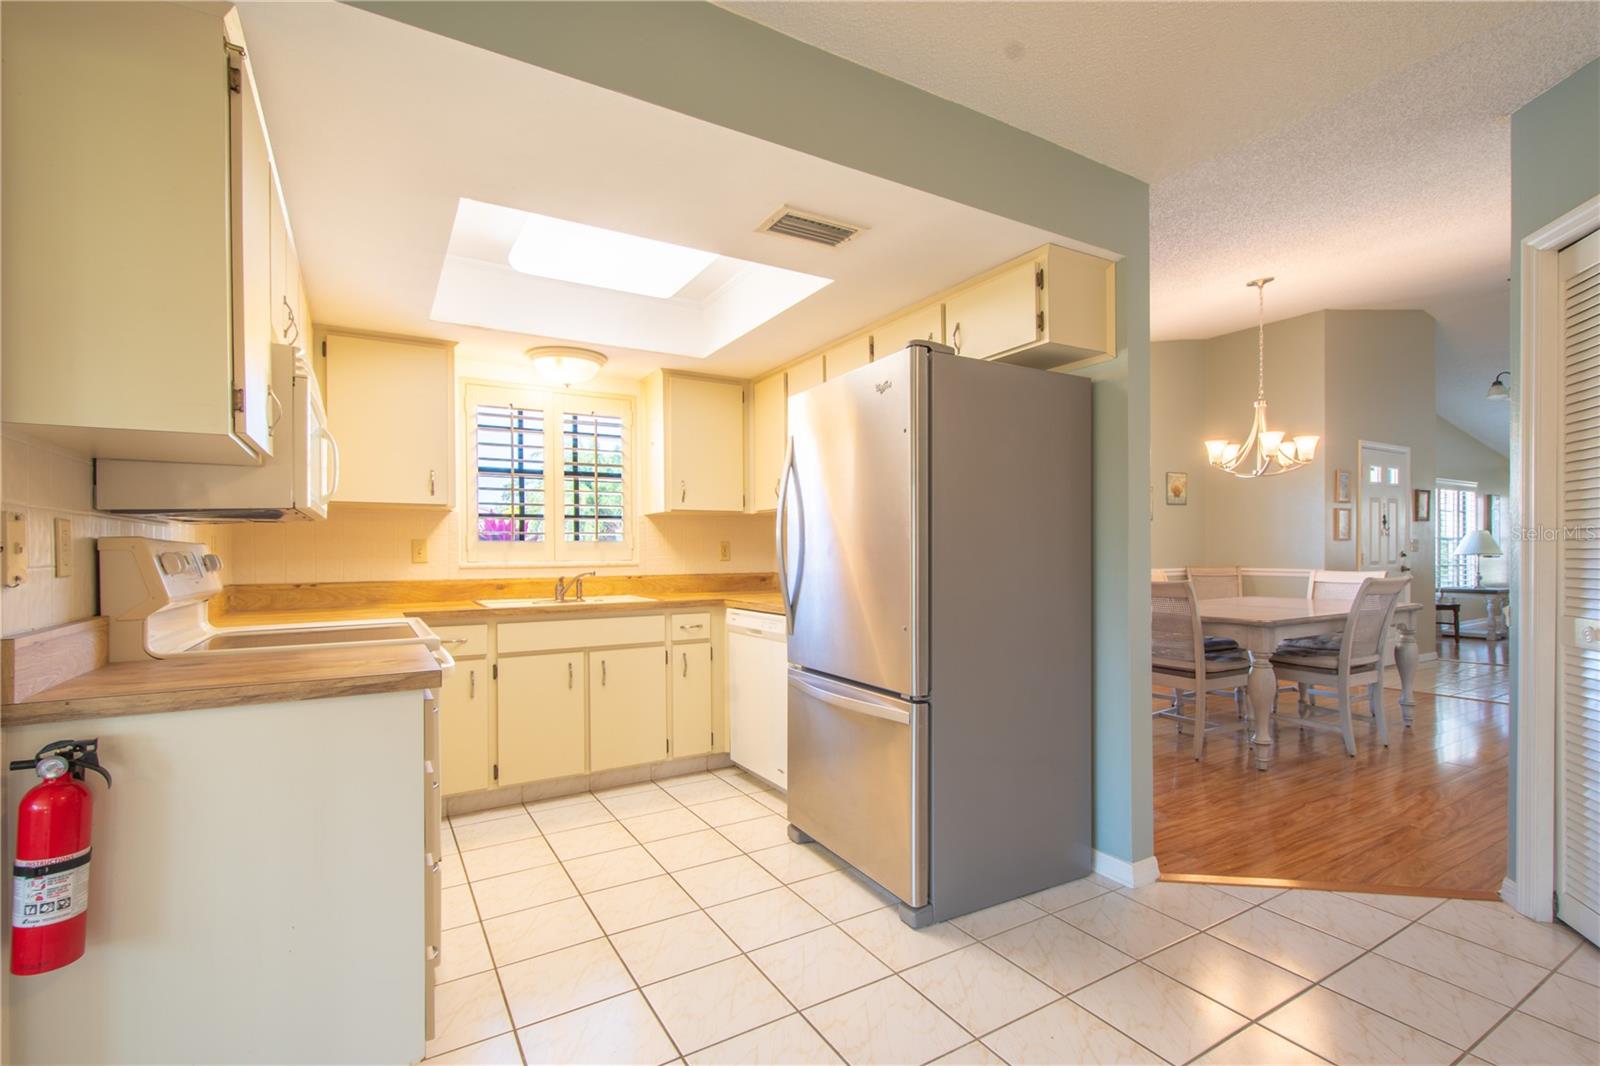 The kitchen features a stainless steel refrigerator with bottom freezer.